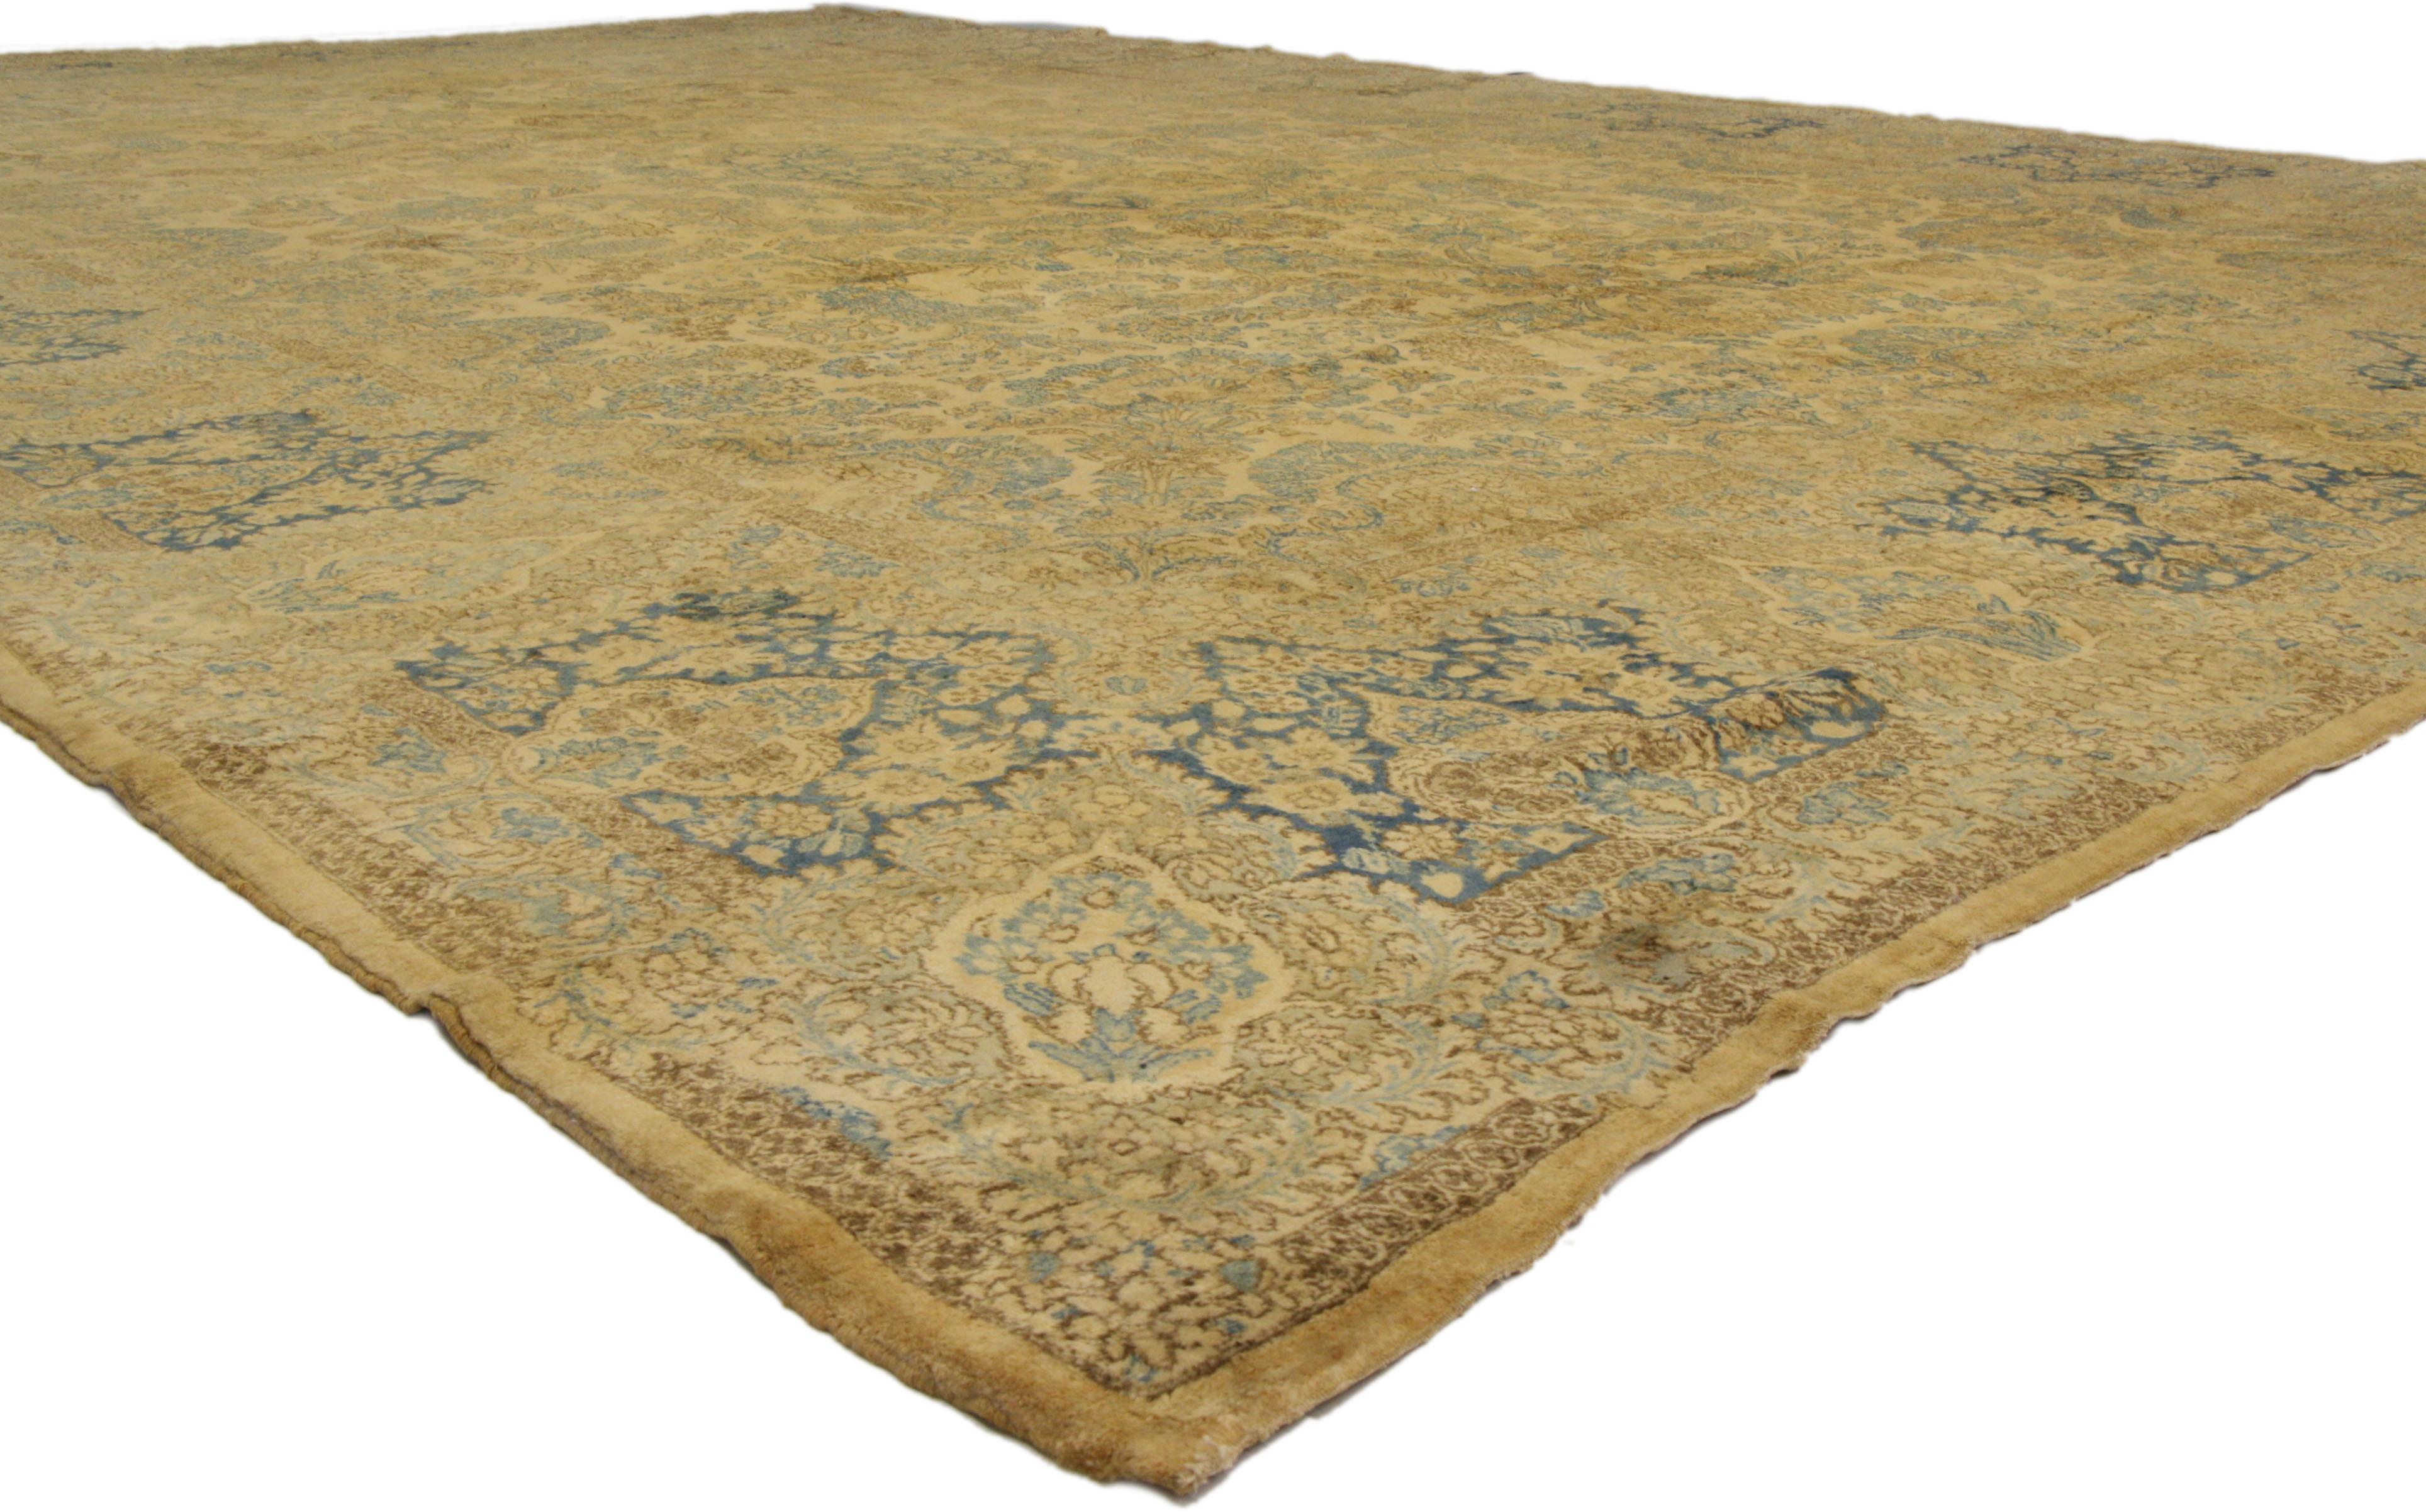 73654 Antique Persian Kerman Palace rug with French Victorian style. Opulence and grace meld together in this hand knotted wool antique Persian Kerman palace rug as it beautifully embodies French Victorian style. The warm golden hued field features